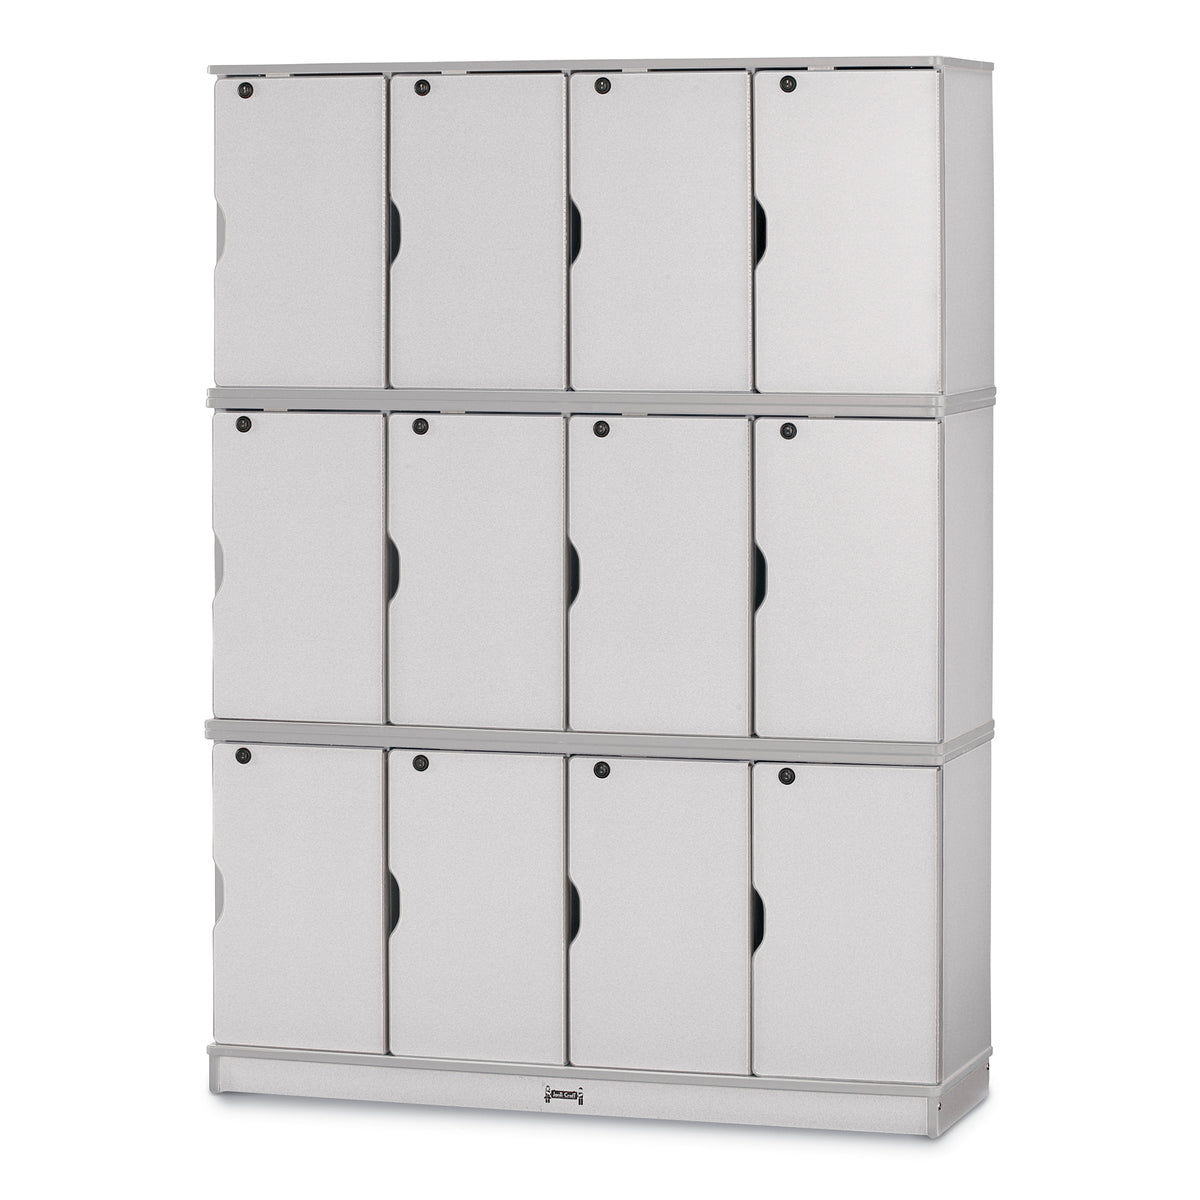 4697JC000, Rainbow Accents Stacking Lockable Lockers -  Triple Stack  - Gray